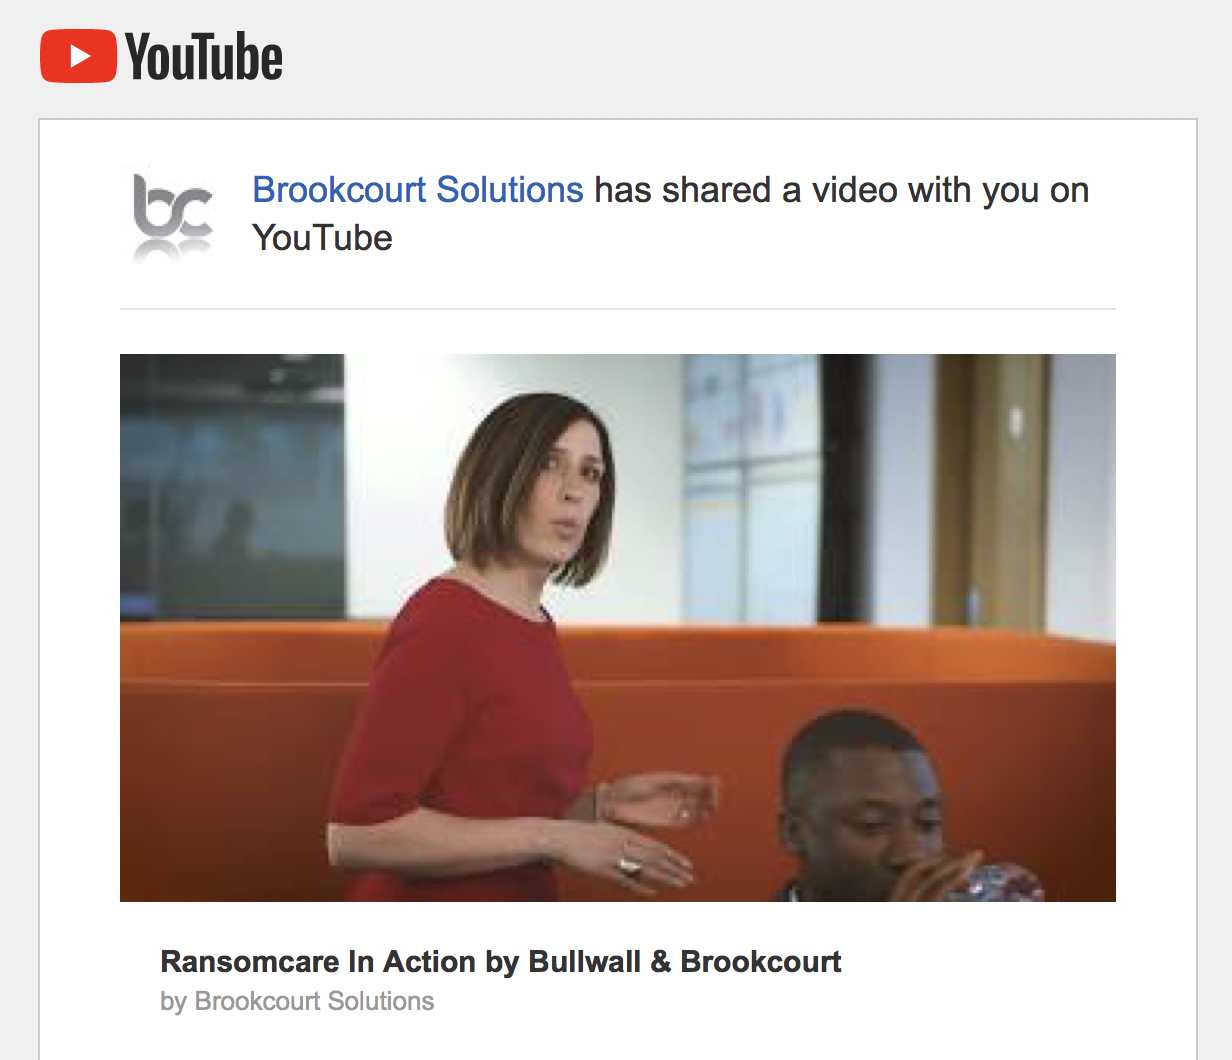 Ransomcare in action by Bullwall & Brookcourt